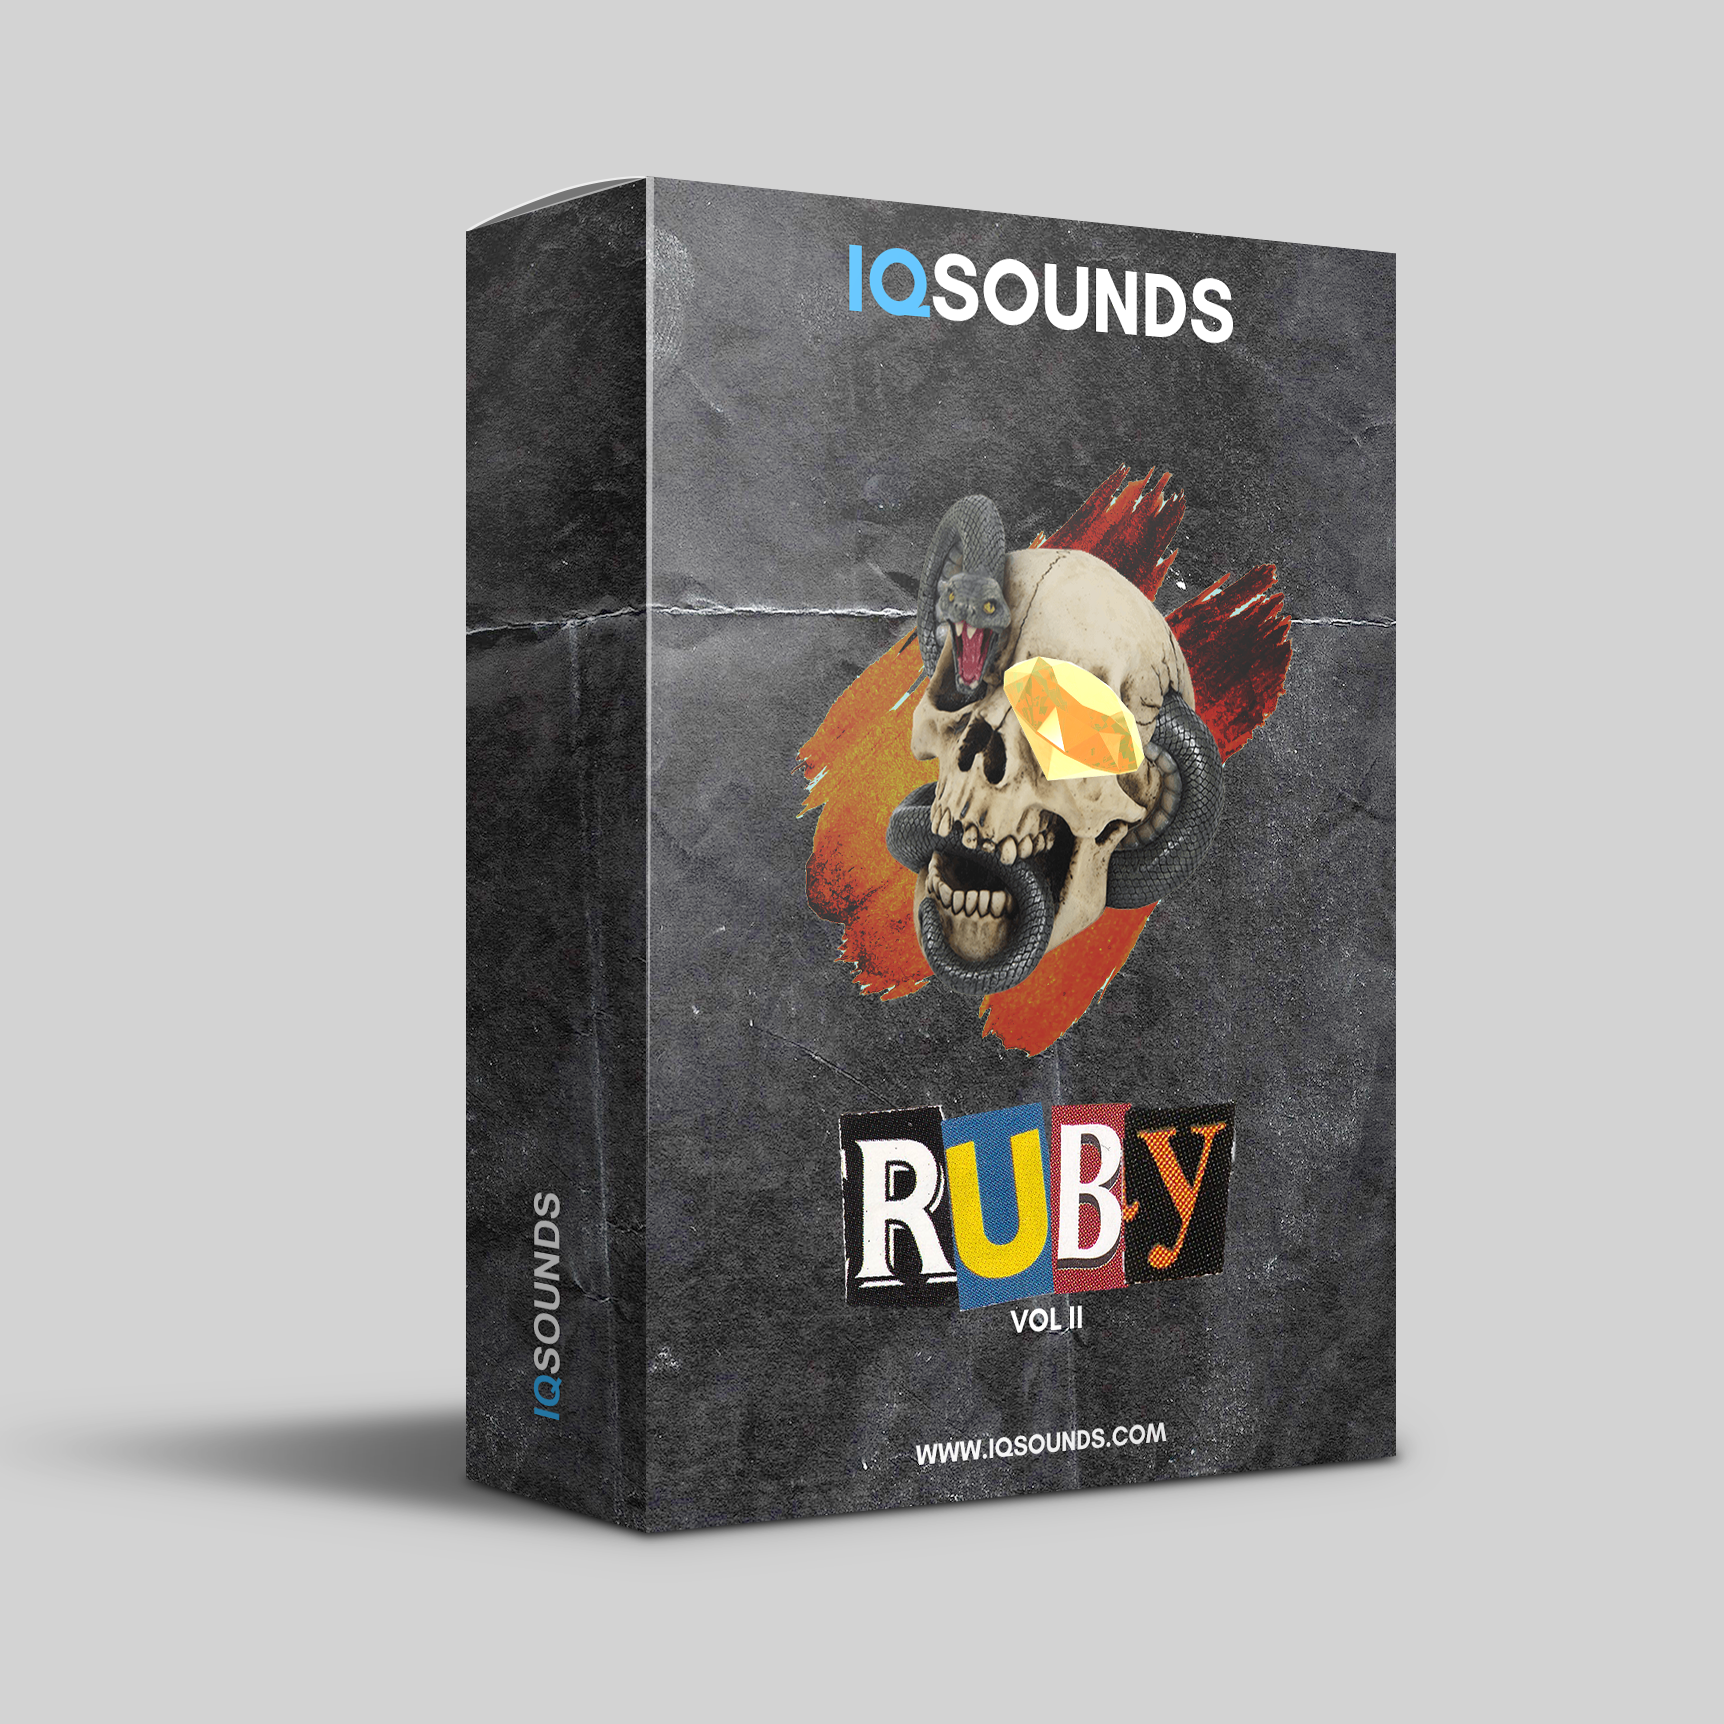 iqsounds, ruby, ruby vol 2, ruby sample pack, trap samples, trap melodies, drill samples, uk drill, uk drill fl studio, fl studio trap samples, royalty free trap samples